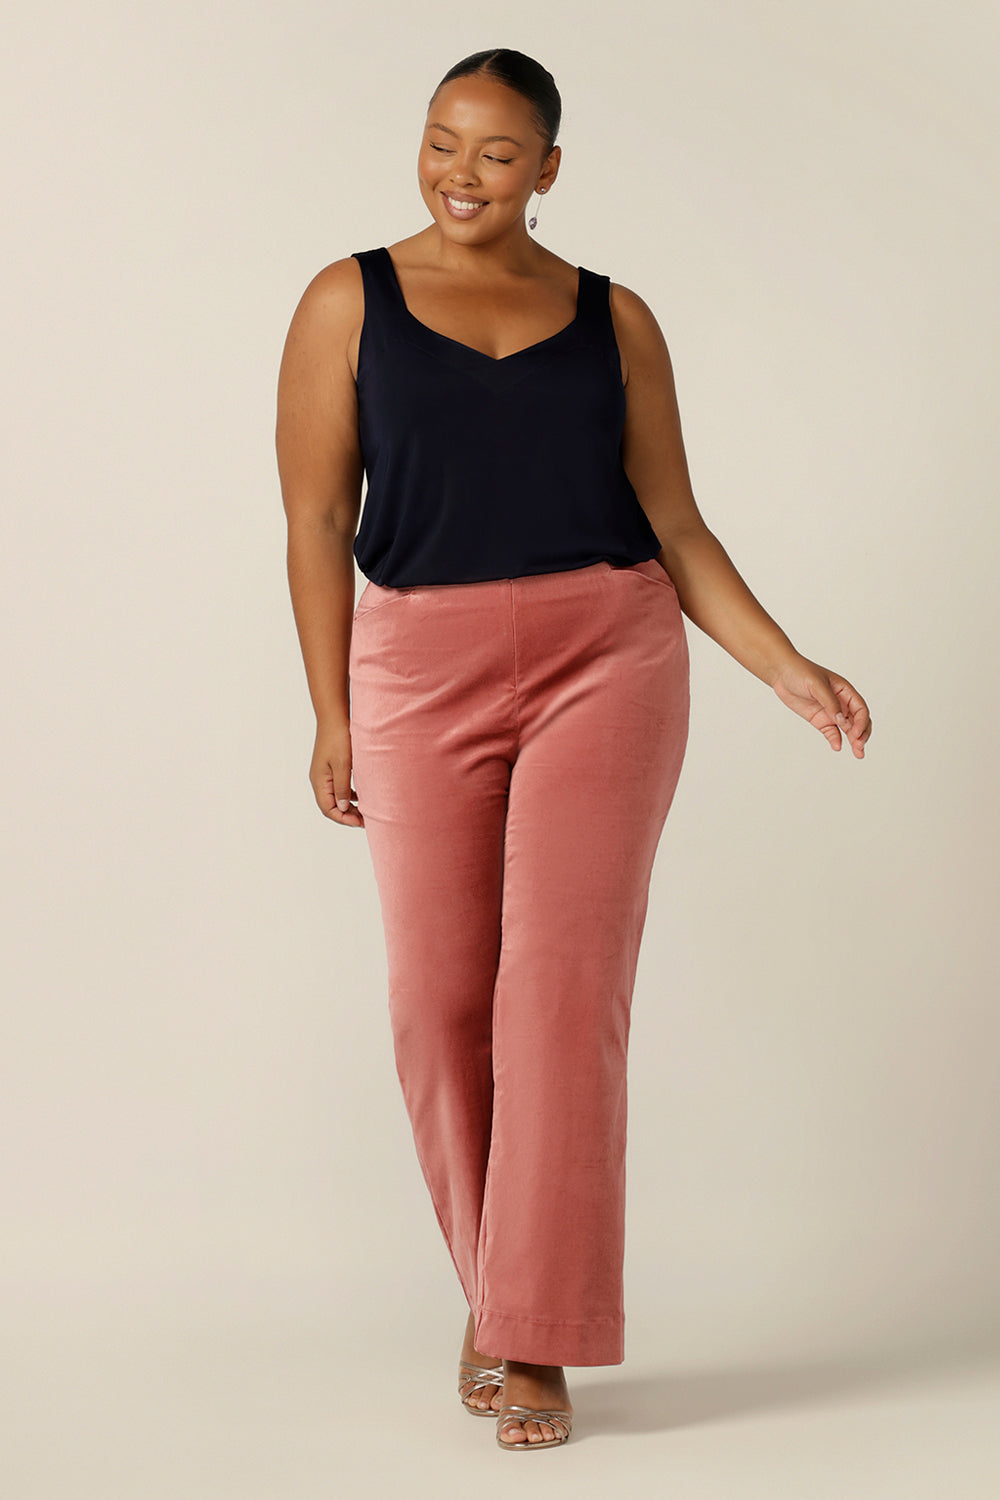 Evening and cocktail wear for plus size women gets a touch of disco fever with these flared leg, tailored pants in musk pink velveteen. Worn with a slinky navy blue cami top for eveningwear, these special event pants are made in Australia in sizes 8 to 24, petite to plus sizes.